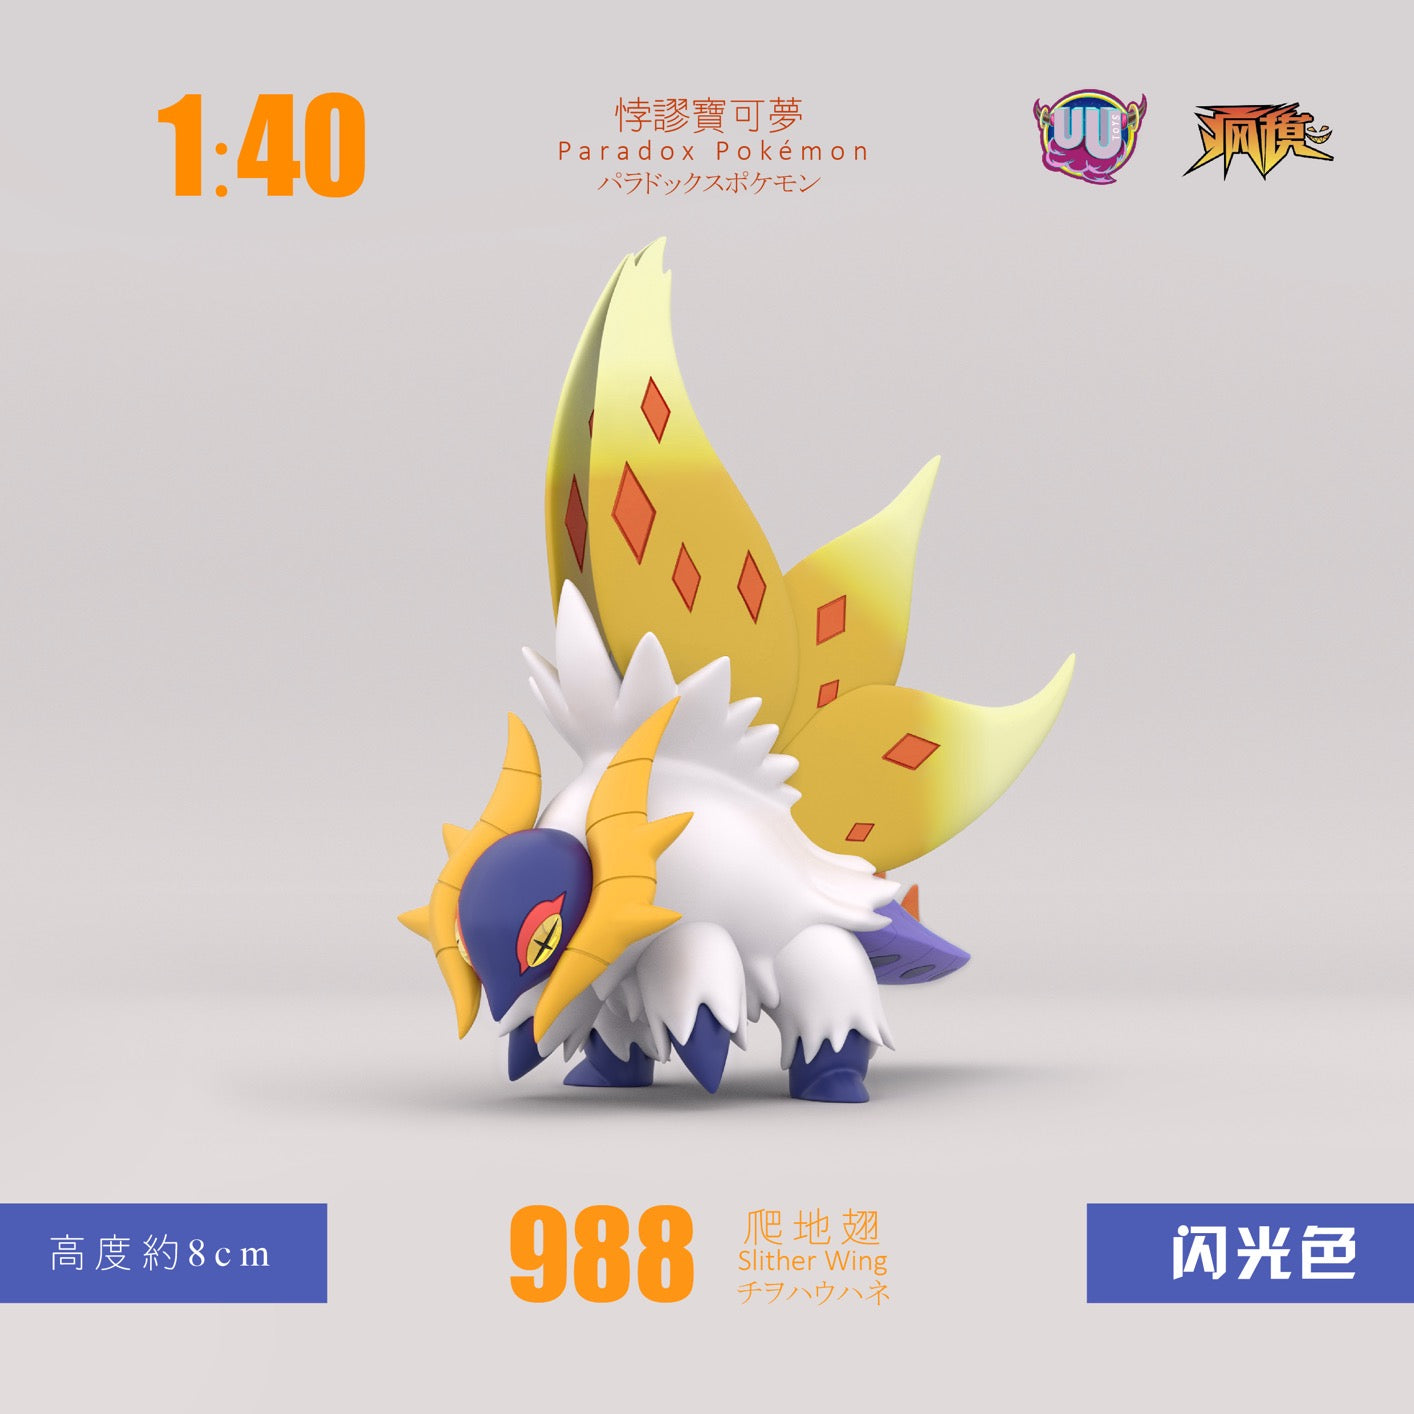 〖Sold Out〗Pokemon Scale World Slither Wing #988 1:40 - UU Studio